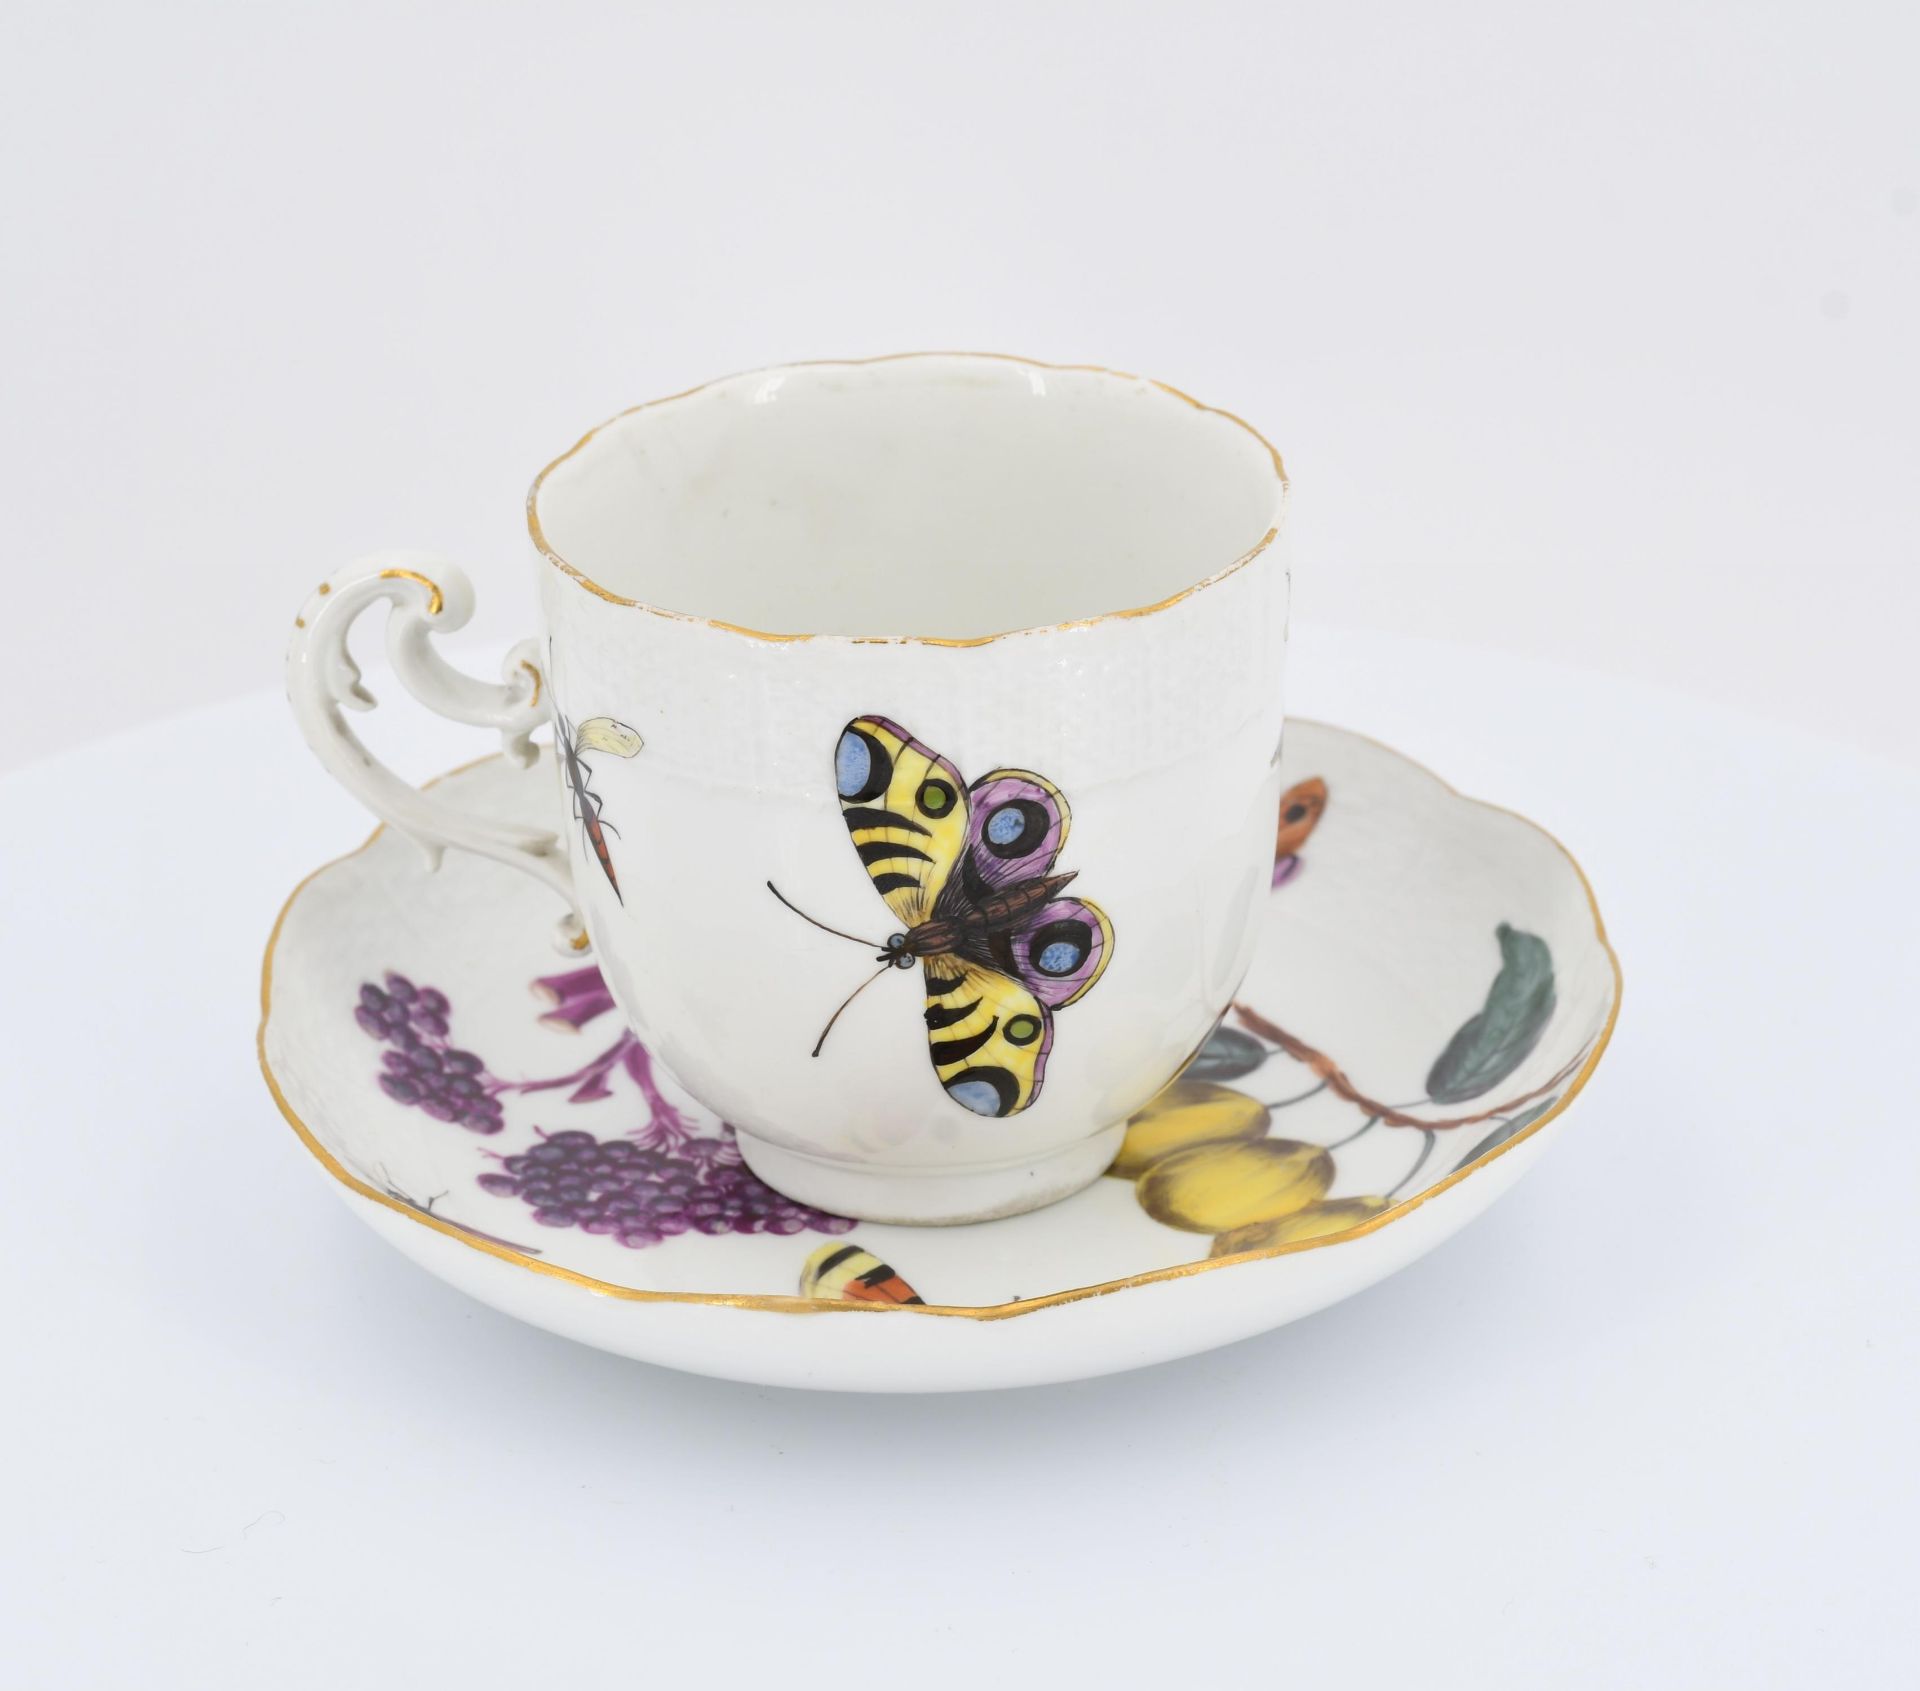 Cup and saucer with fruits and insects - Image 4 of 7